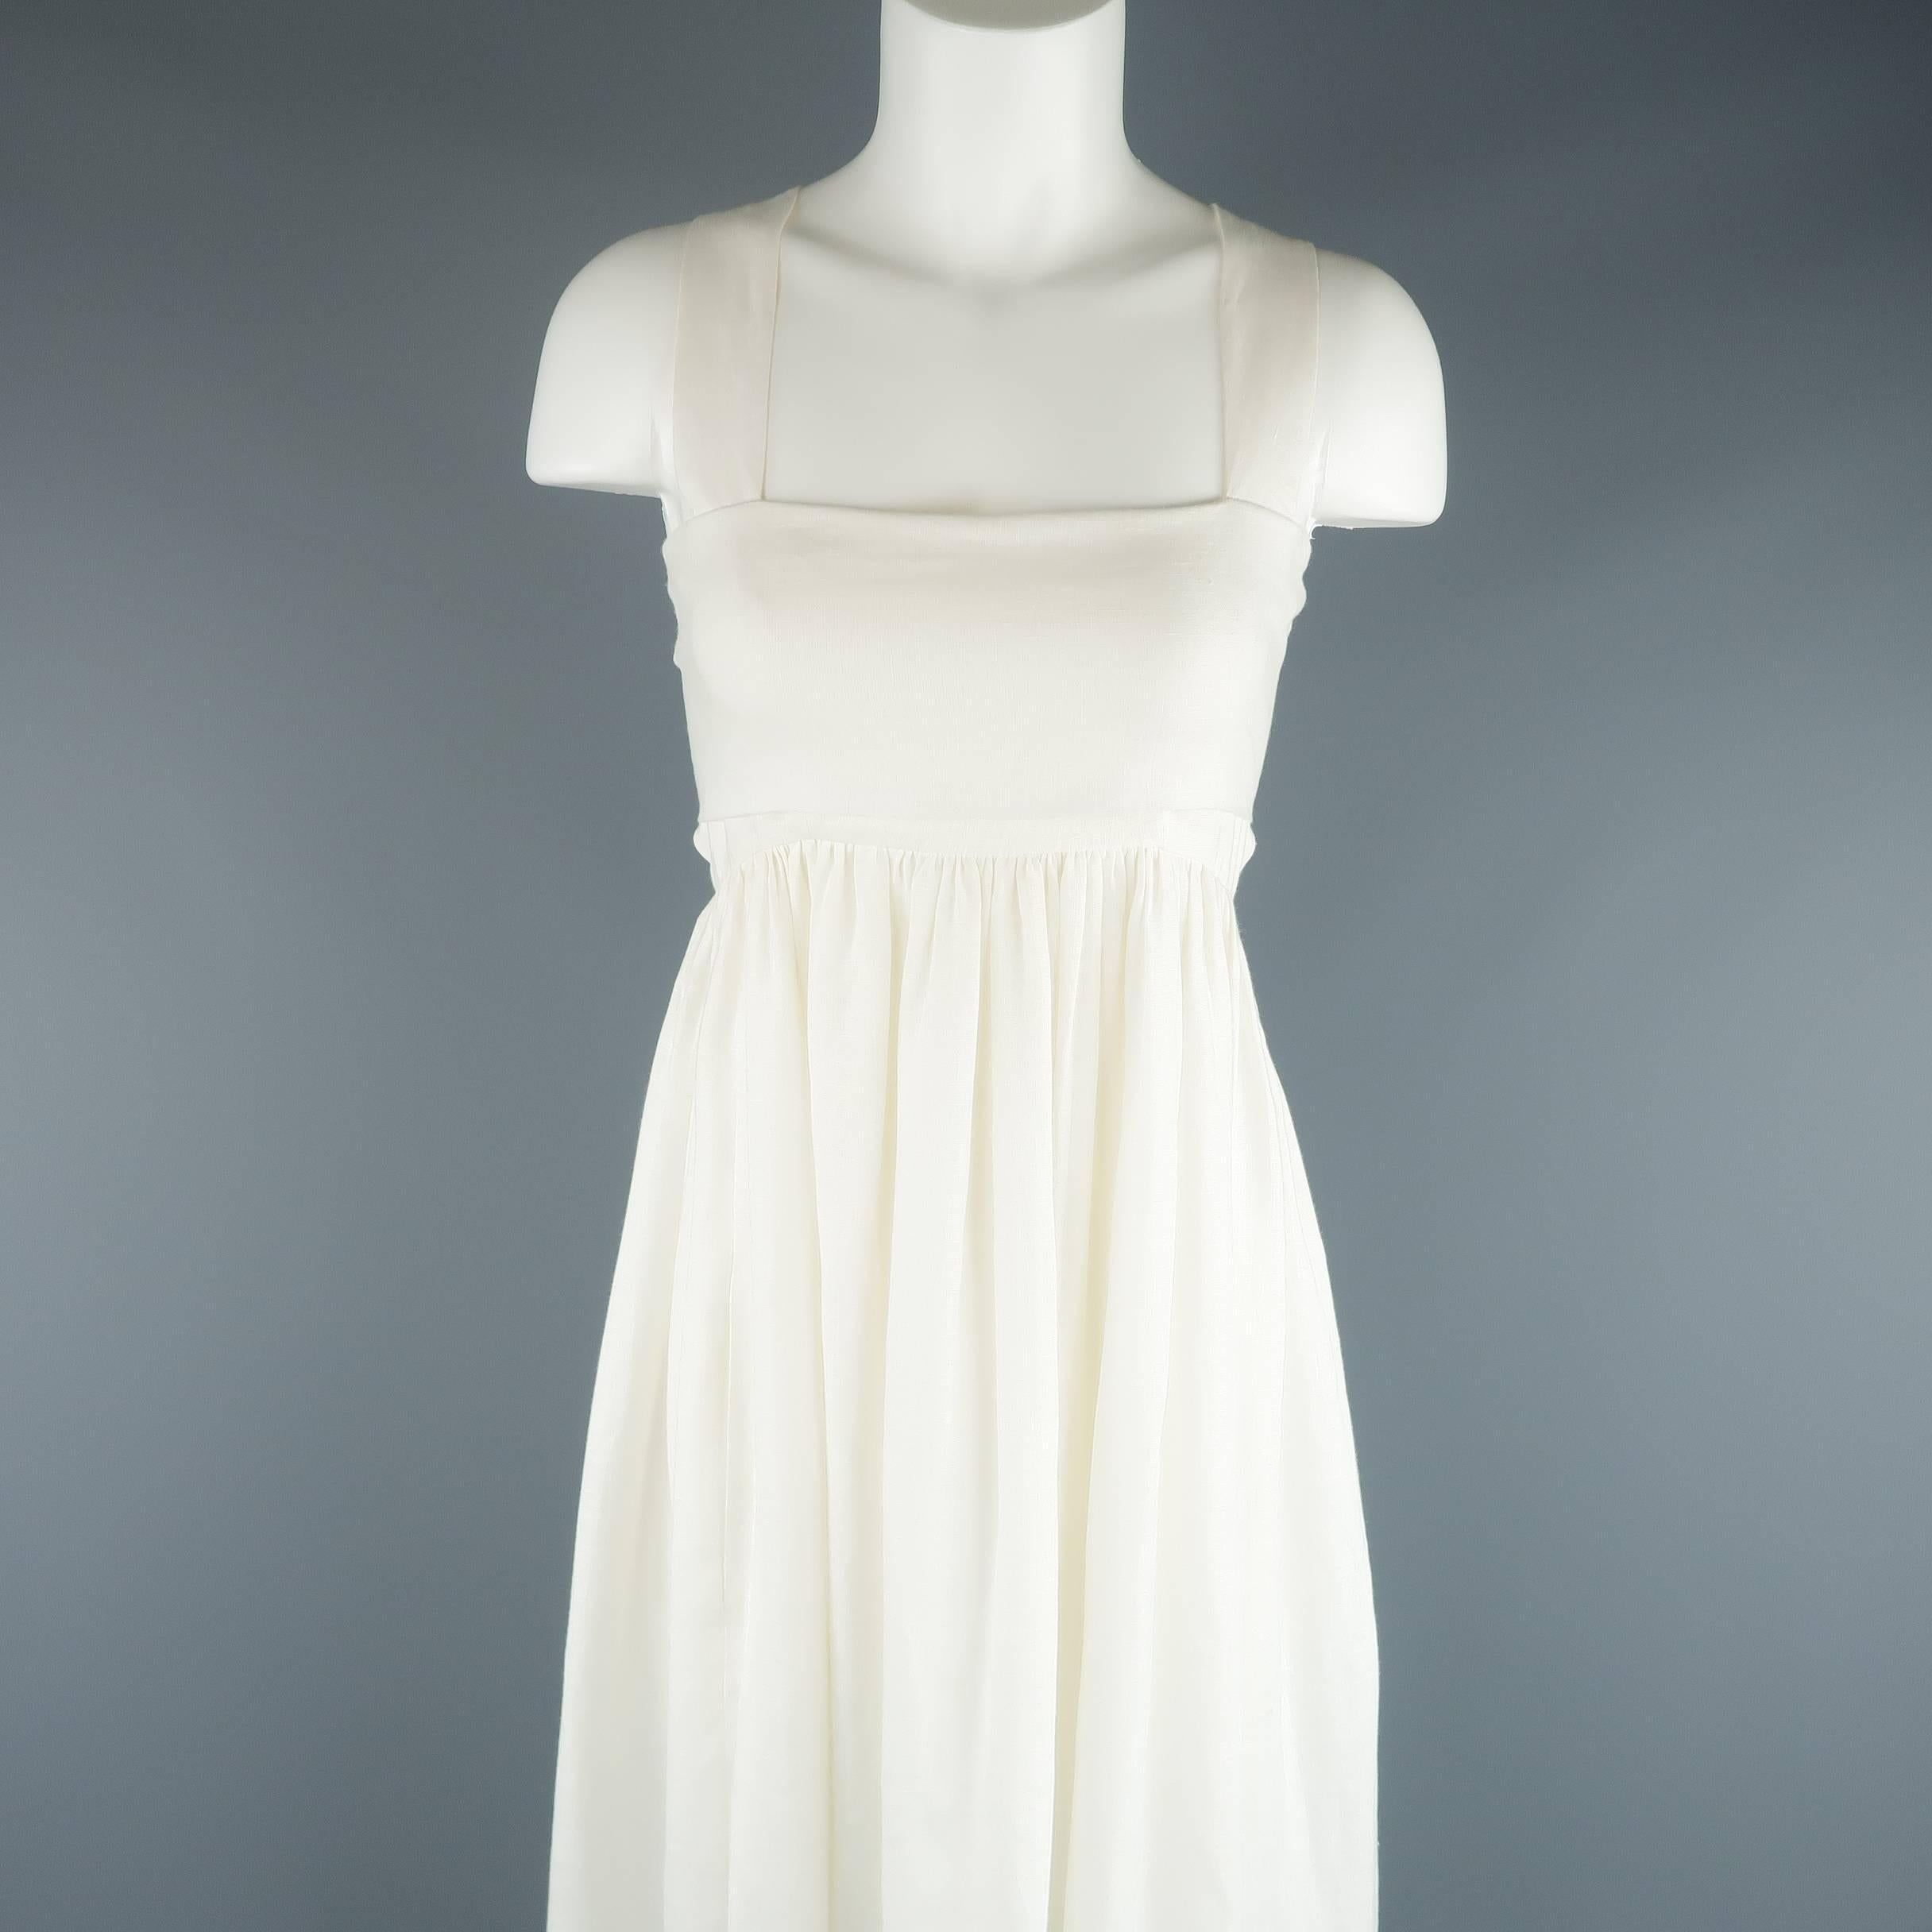 CHLOE peasant style maxi dress comes in cream linen and features a folded panel bustline that ties in the back, empire waistline, back cutouts, and maxi skirt with ruffled hem.
 
Excellent Pre-Owned Condition.
Marked: EU 34
 
Measurements:
